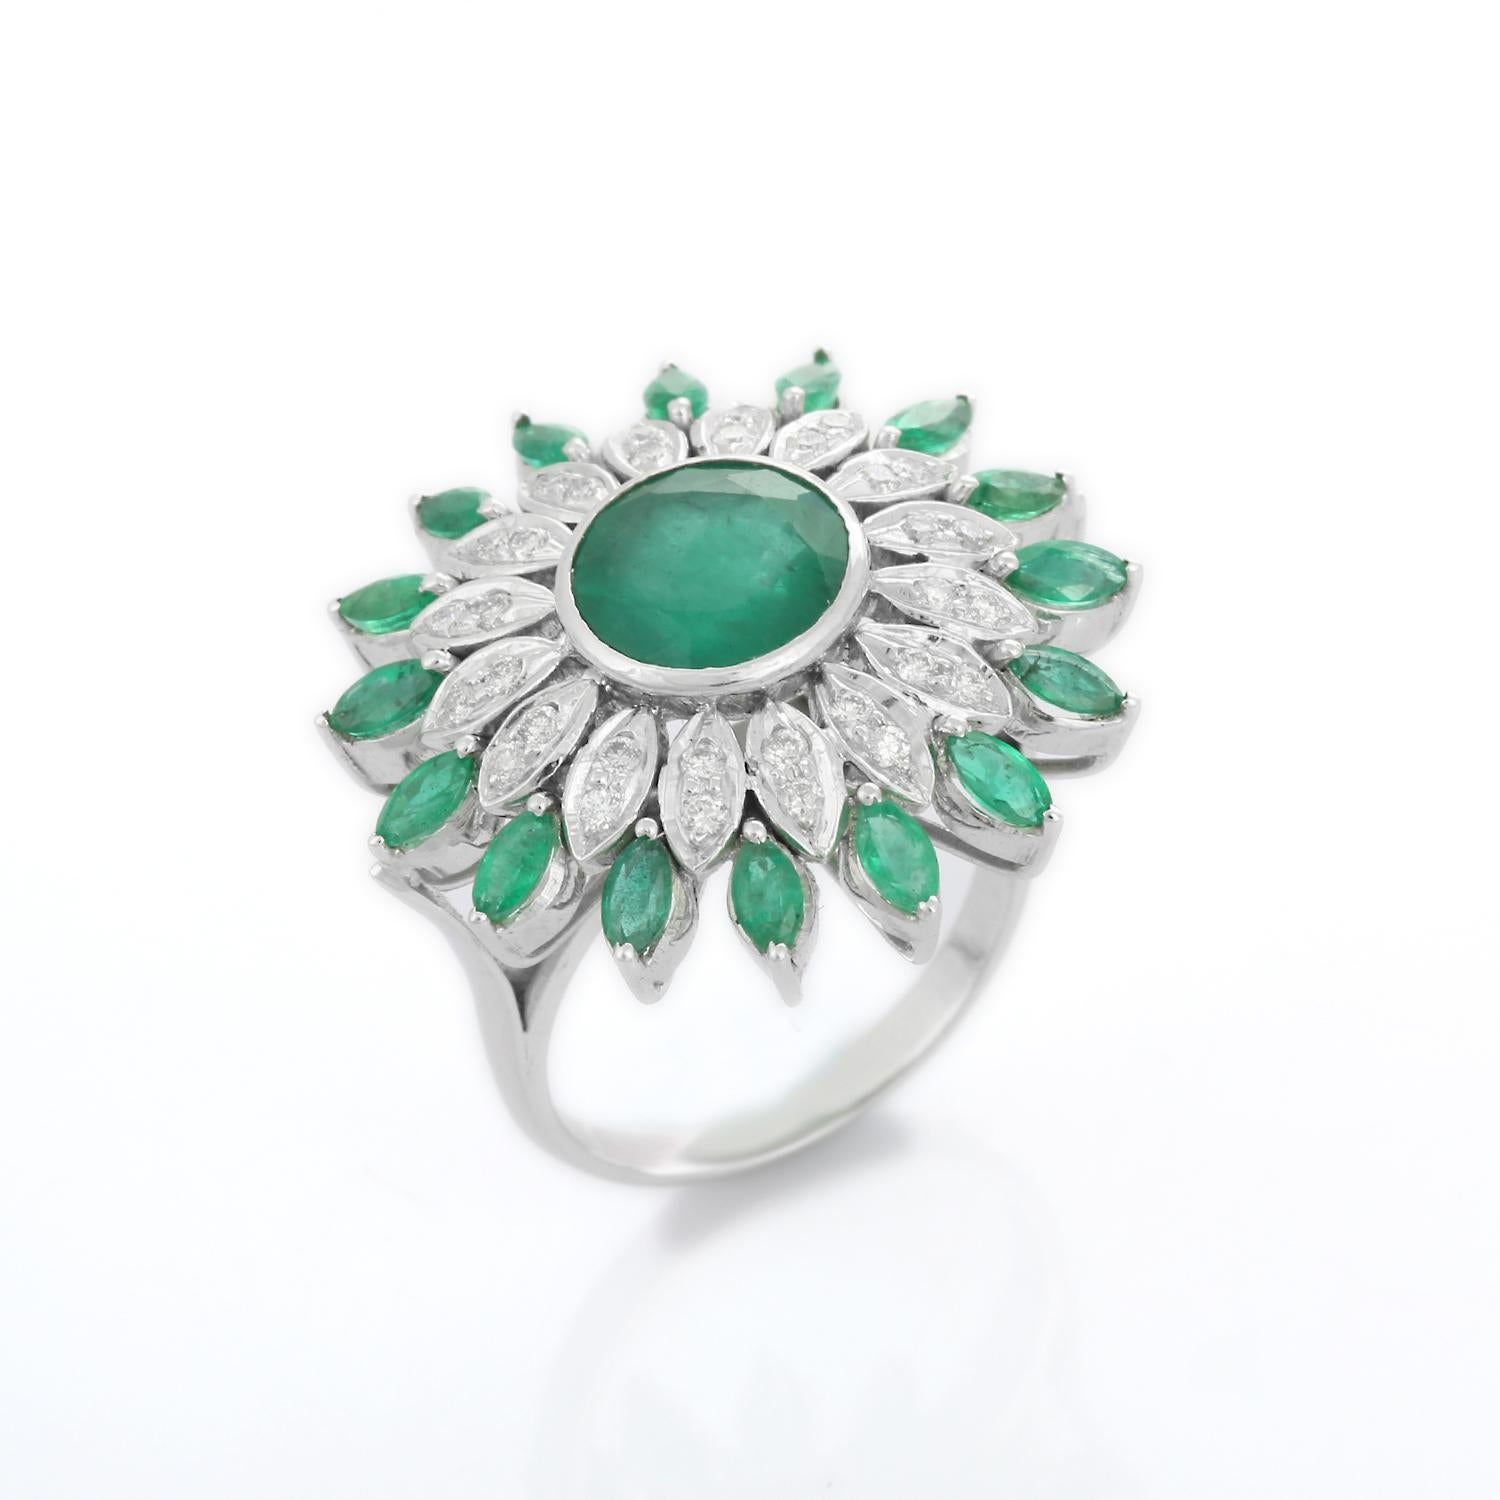 For Sale:  Statement Emerald Ring in 18K White Gold with Diamonds 7